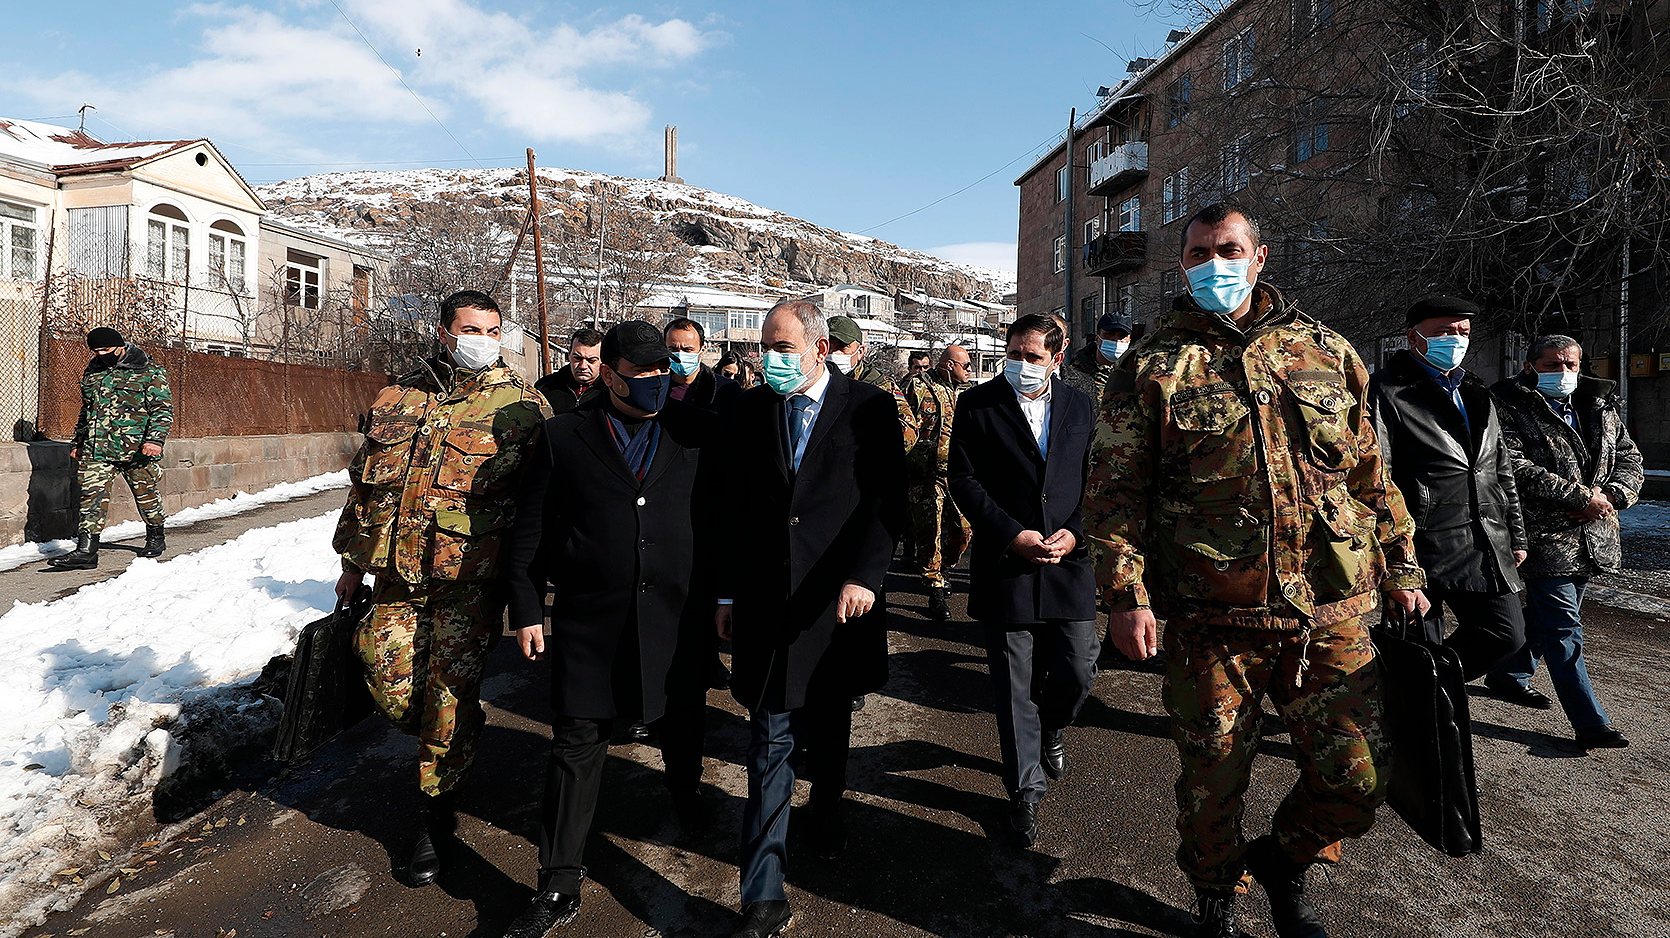 epa08897899 A handout photo made available by the press office of Armenian government shows Armenian Prime Minister Nikol Pashinyan (C) walks on a street in Sisian, Syunik region, Armenia, on the third day of the nationwide mourning 21 December 2020. Armenian Prime Minister Nikol Pashinyan declared a 3-day nationwide mourning period starting on December 19 for people who had been killed in the latest armed conflict between Azerbaijan and Armenia over the Nagorno-Karabakh territory along the contact line of the self-proclaimed Nagorno-Karabakh Republic (also known as Artsakh).  EPA/ARMENIAN GOVERNMENT PRESS OFFICE HANDOUT MANDATORY CREDIT HANDOUT EDITORIAL USE ONLY/NO SALES